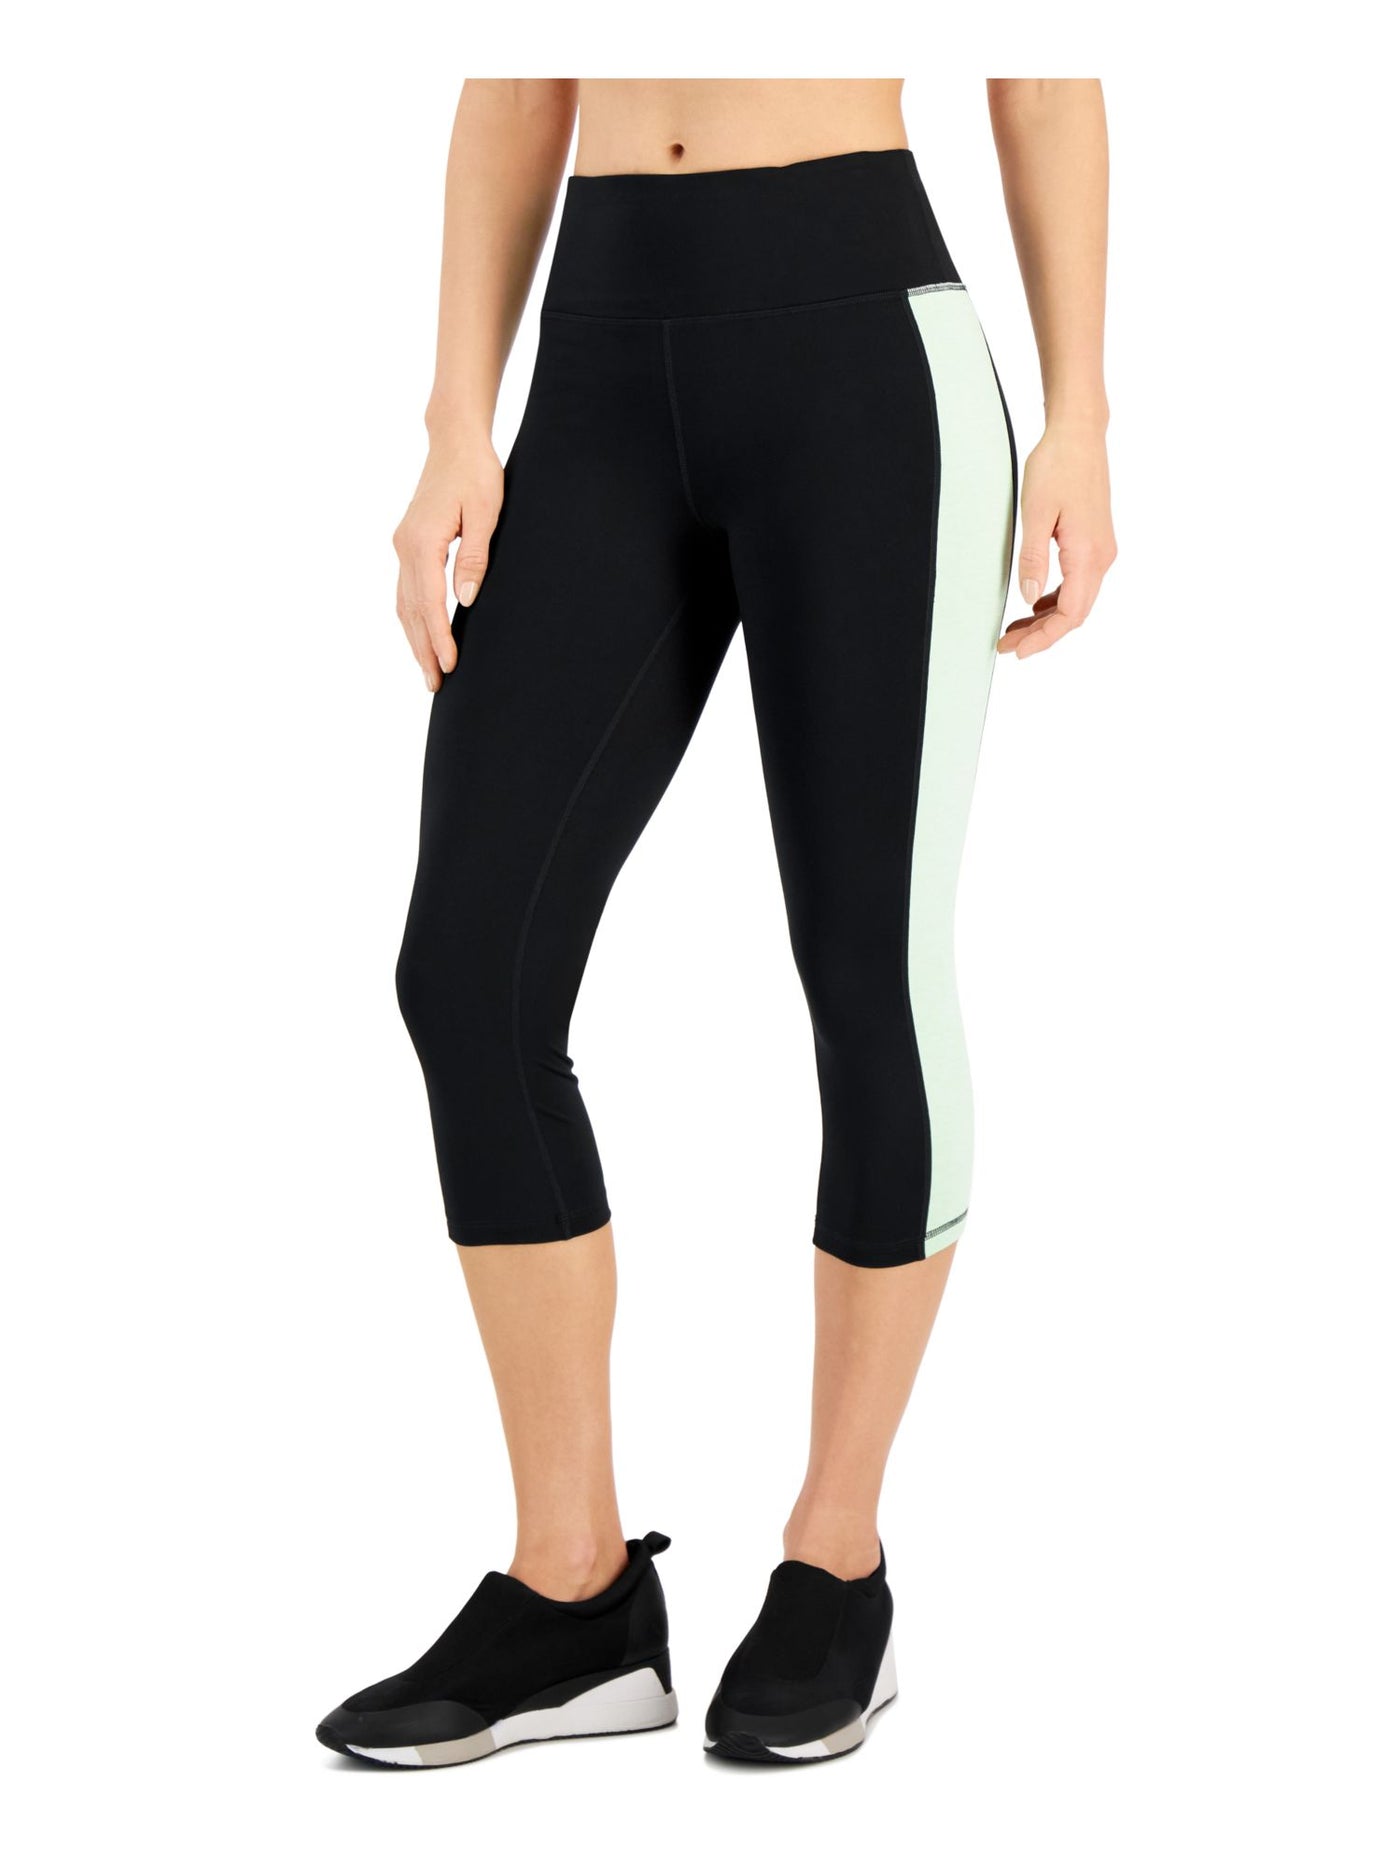 IDEOLOGY Womens Black Stretch Pocketed Moisture Wicking Color Block Active Wear Cropped Leggings S